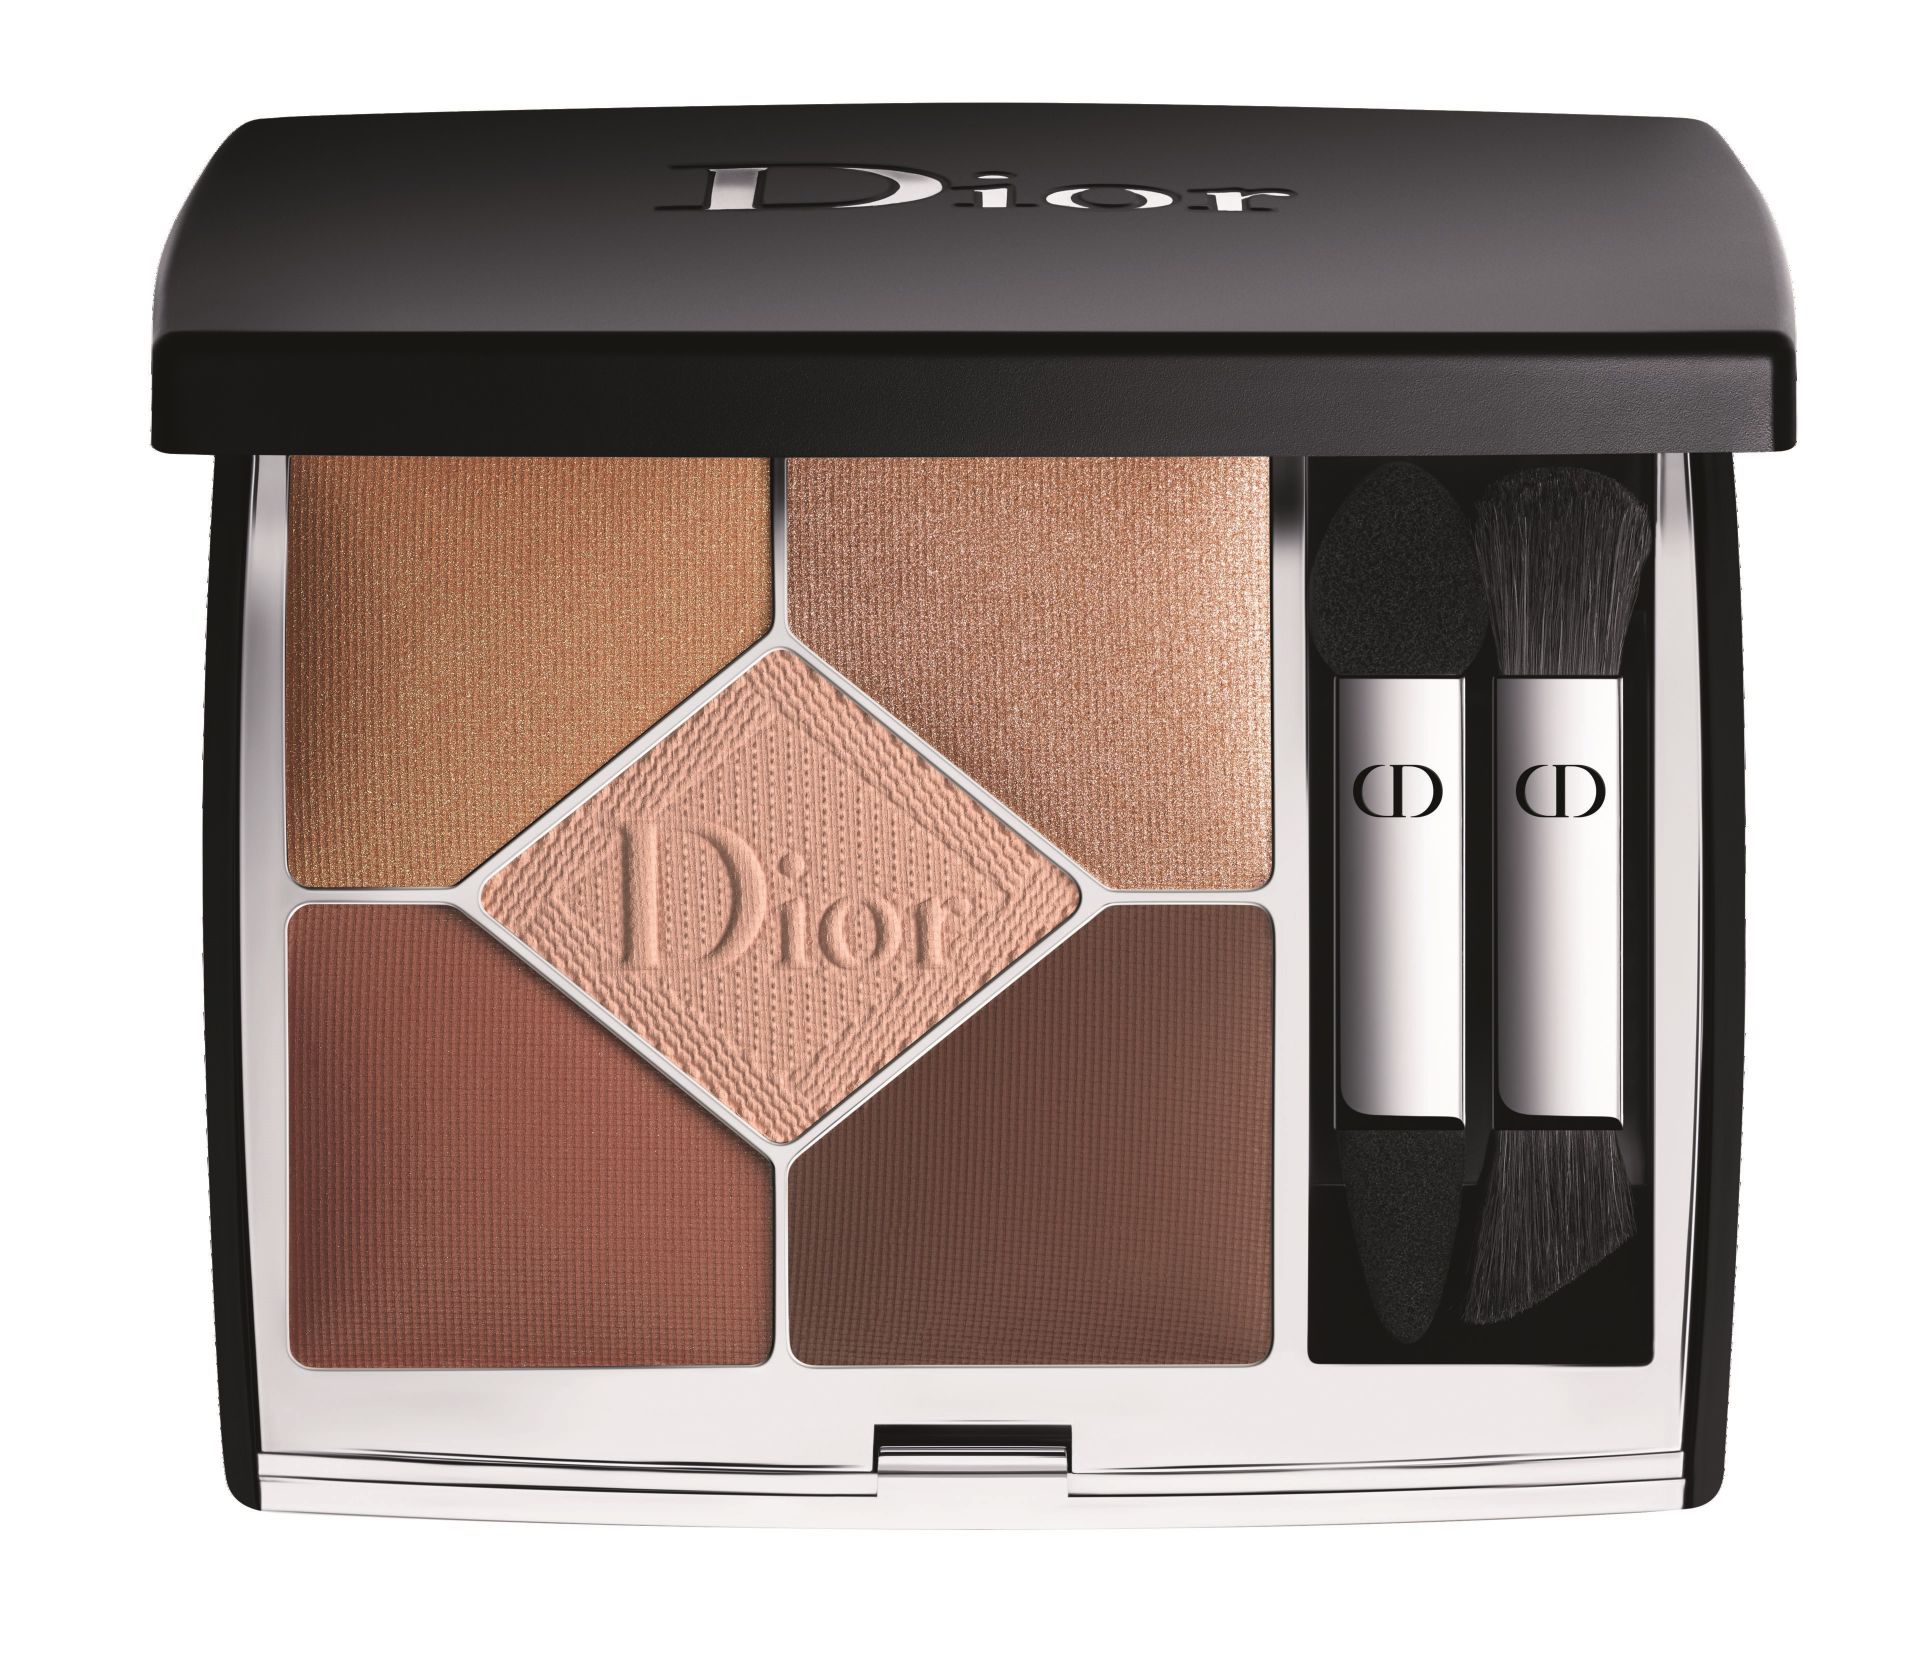 DIORSHOW 5 COULEURS COUTURE EYESHADOW PALETTE IN 519 NUDE DENTELLE